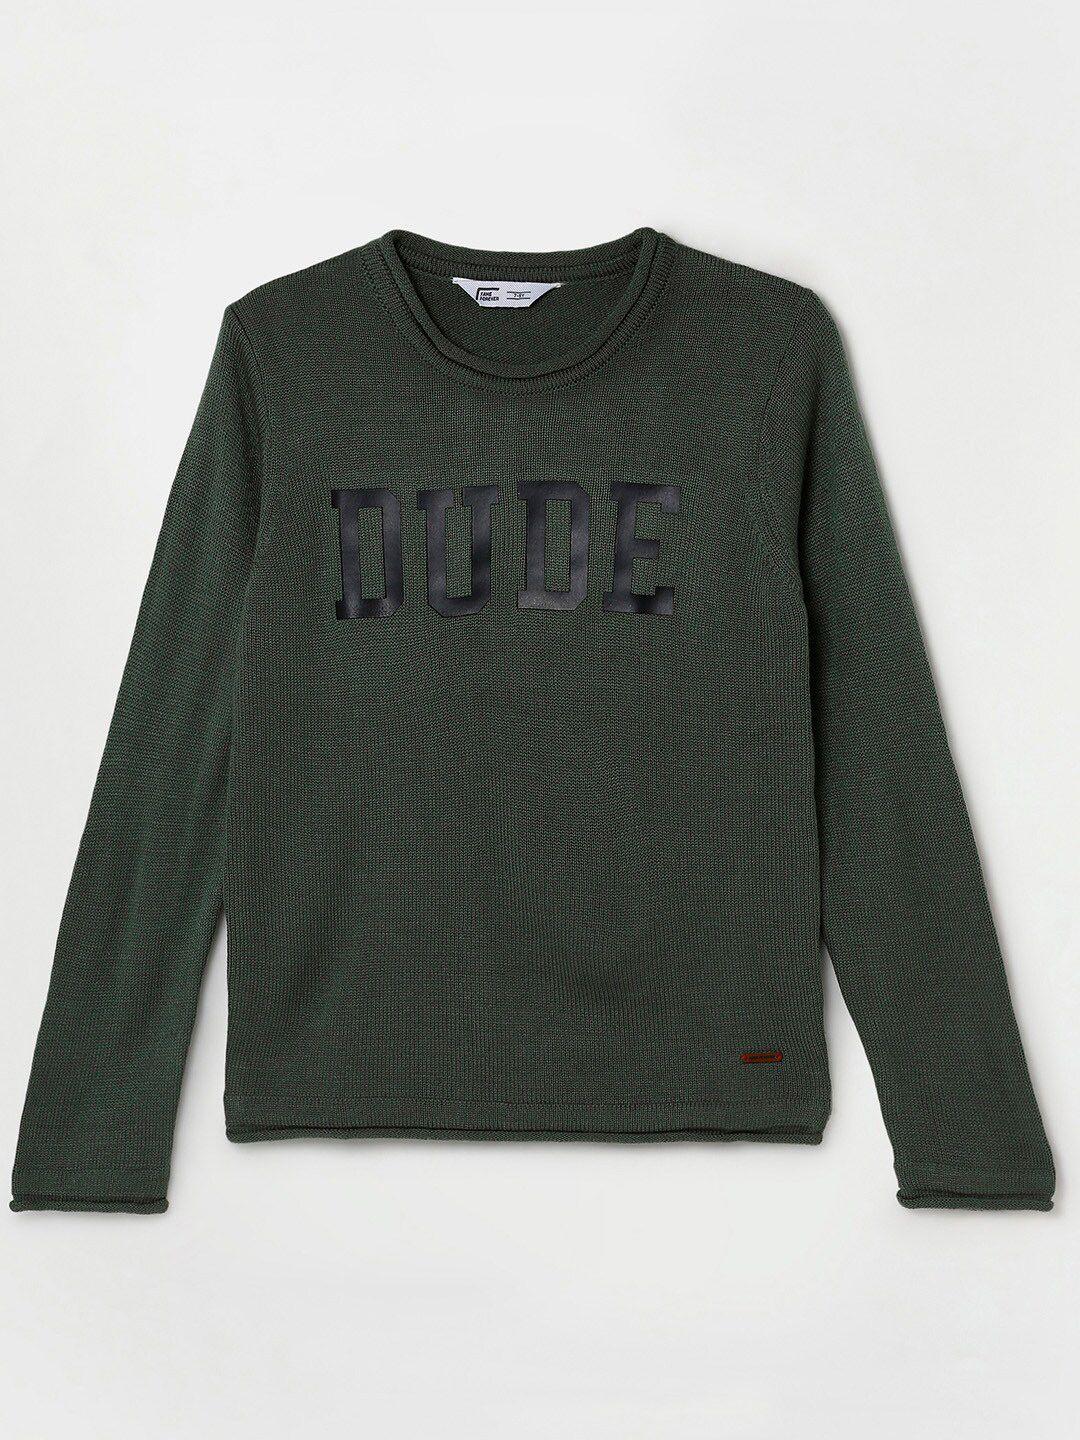 fame forever by lifestyle boys olive green & black typography printed pullover sweater